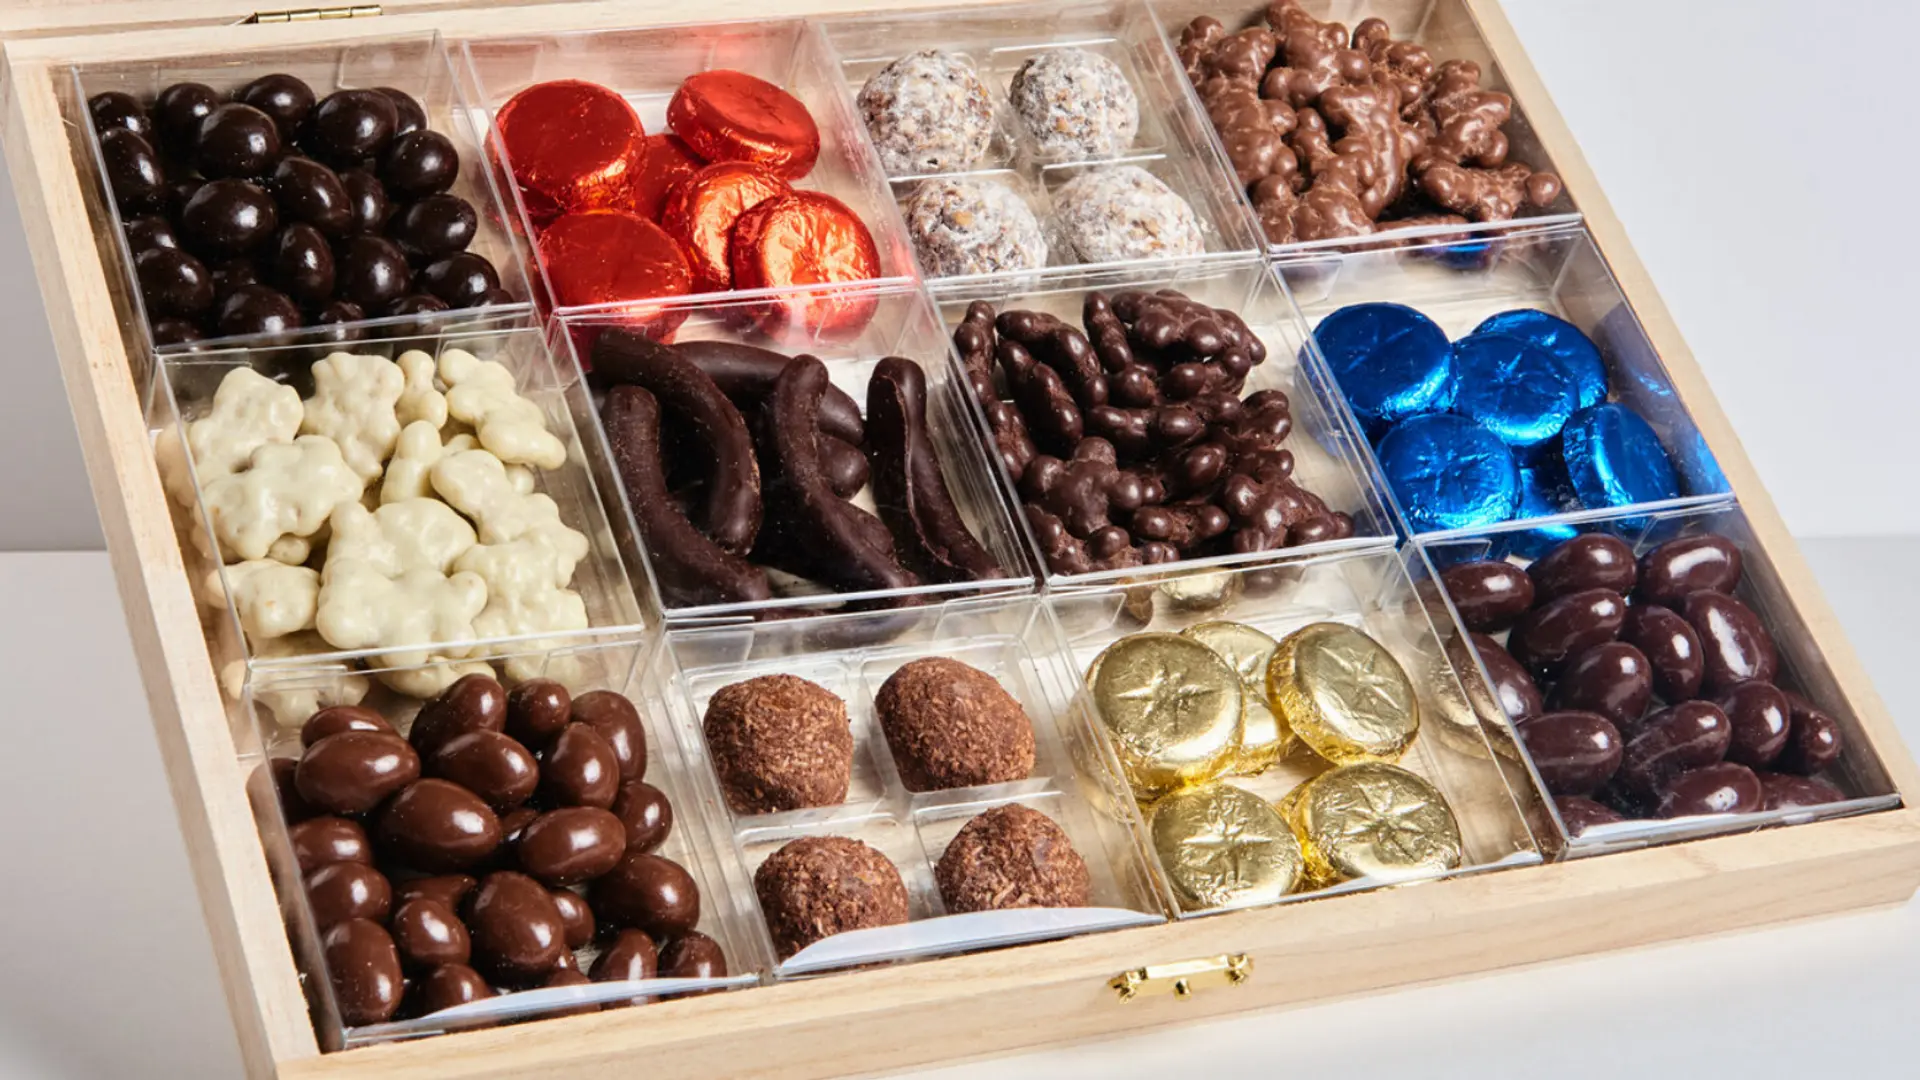 Lifestyle Toplists - 10 Best Chocolate Shops in the World